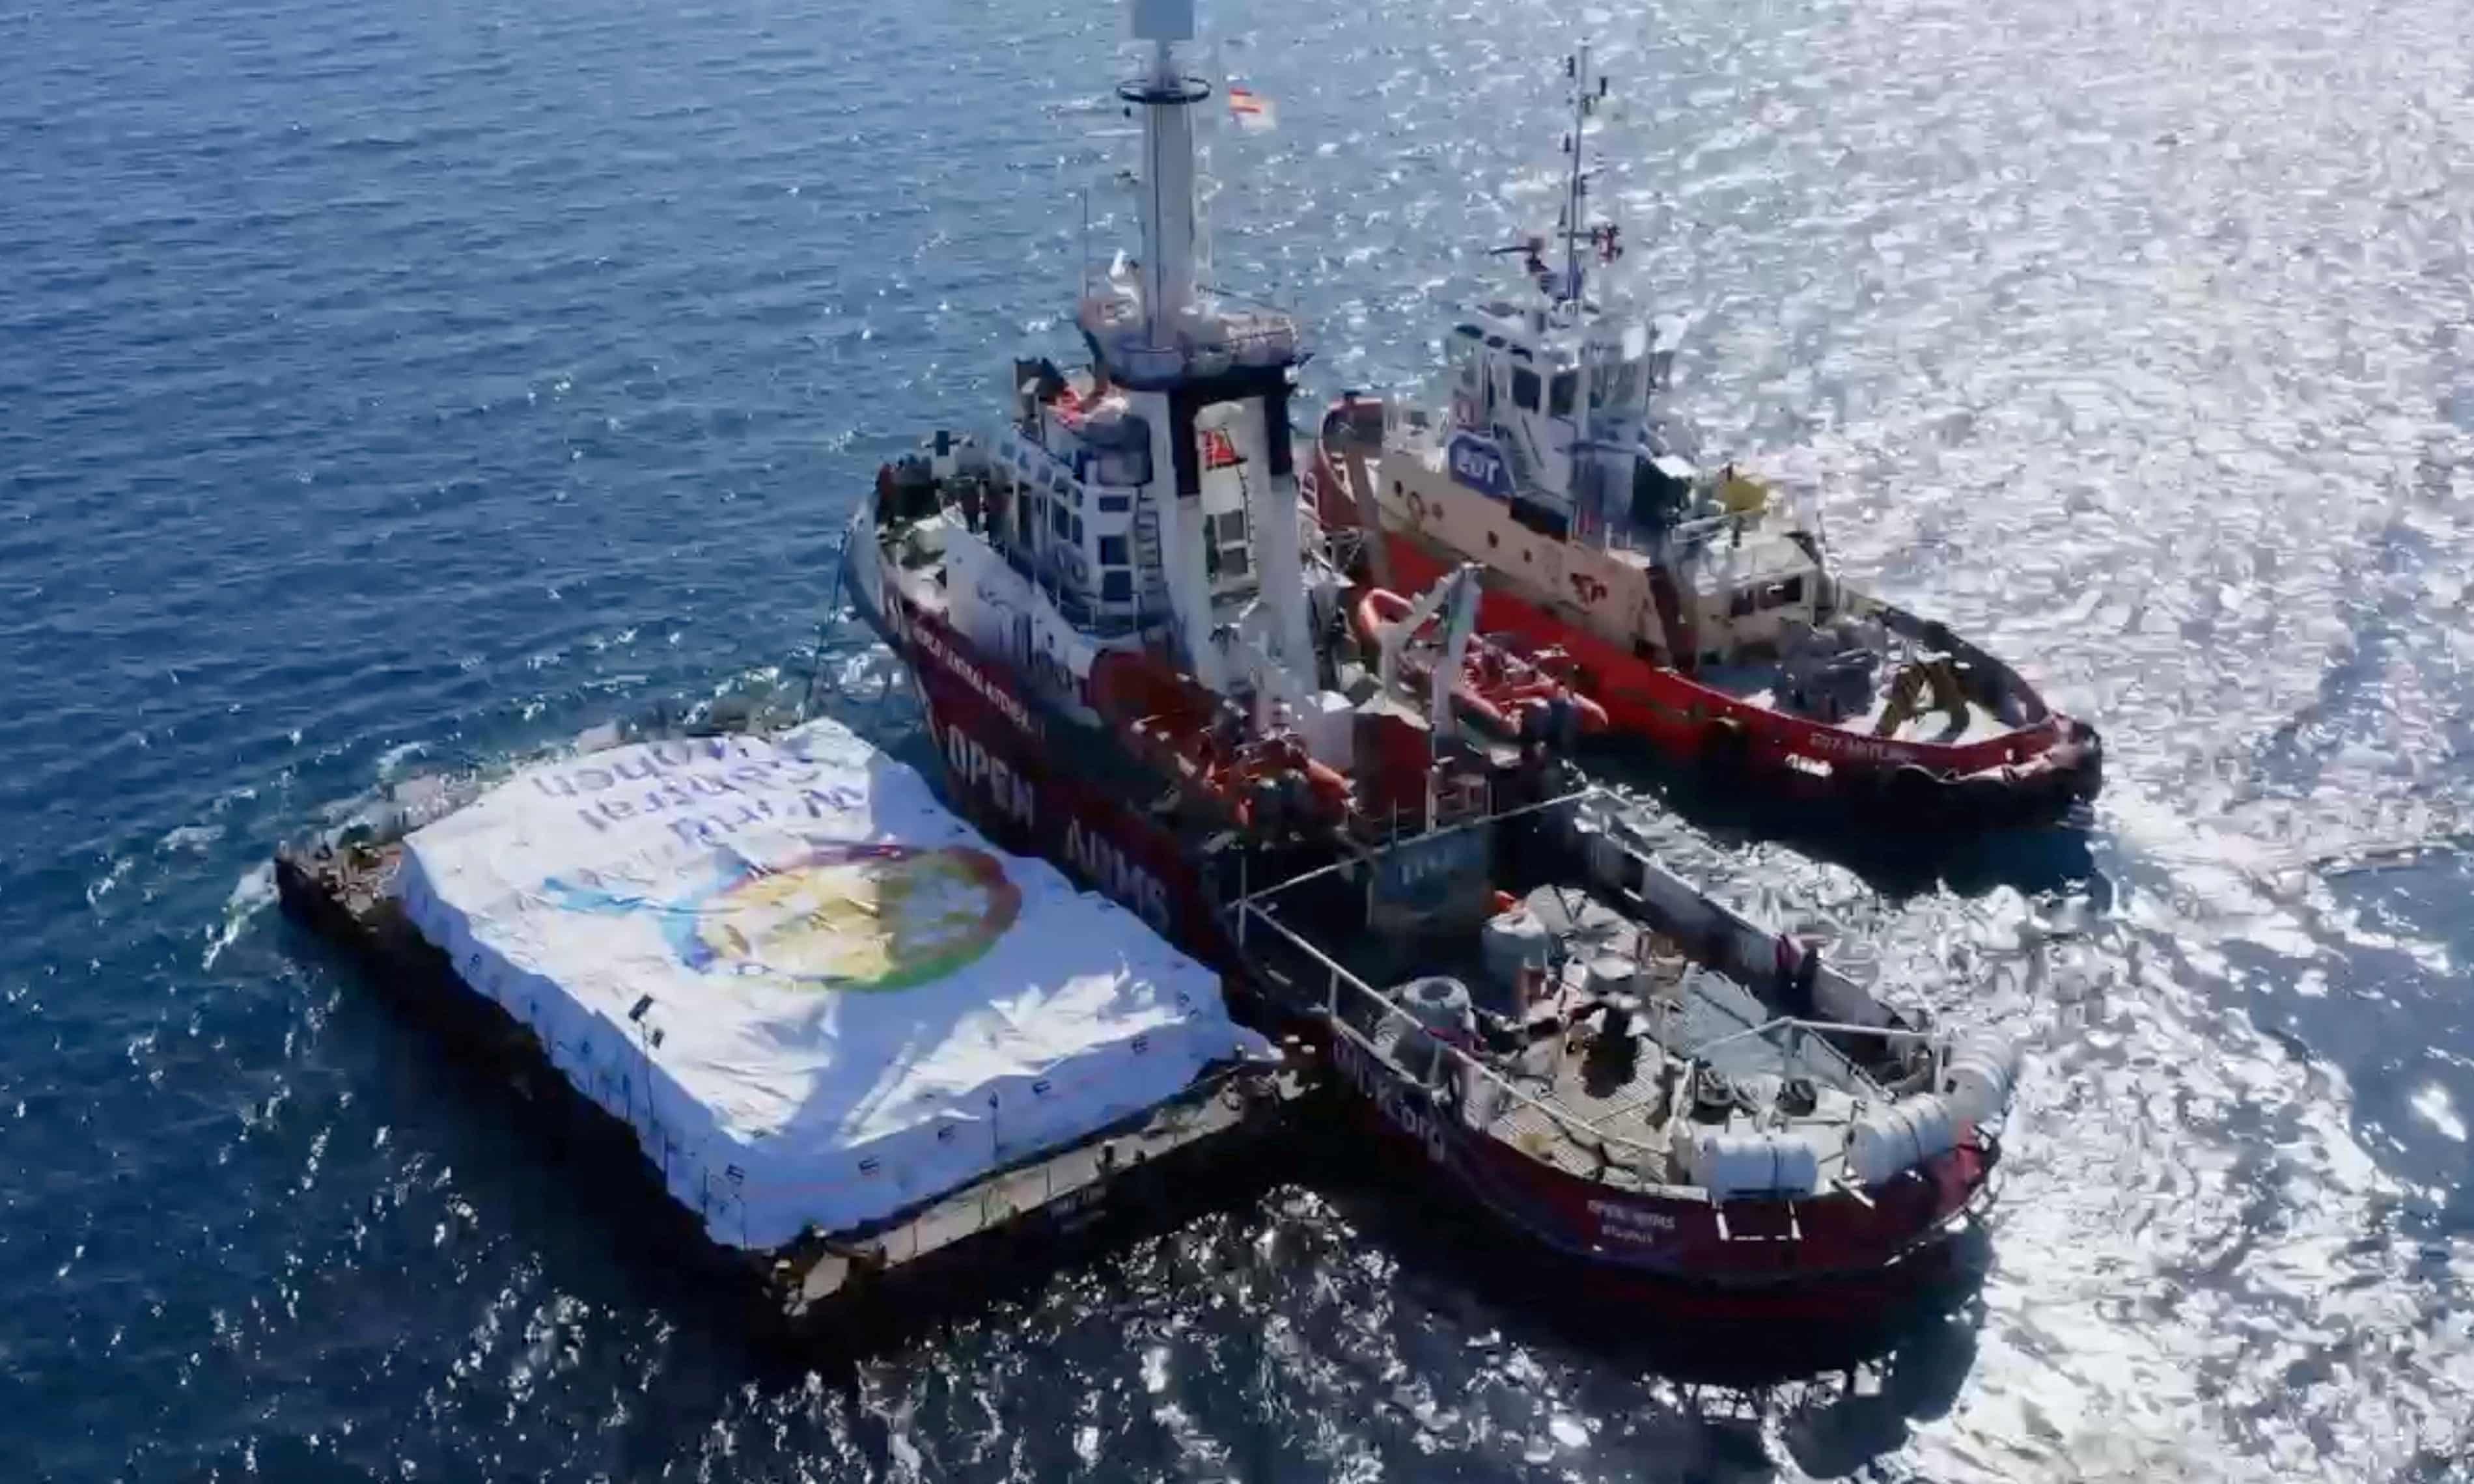 First aid ship to Gaza leaves Cyprus port in pilot project (theguardian.com)